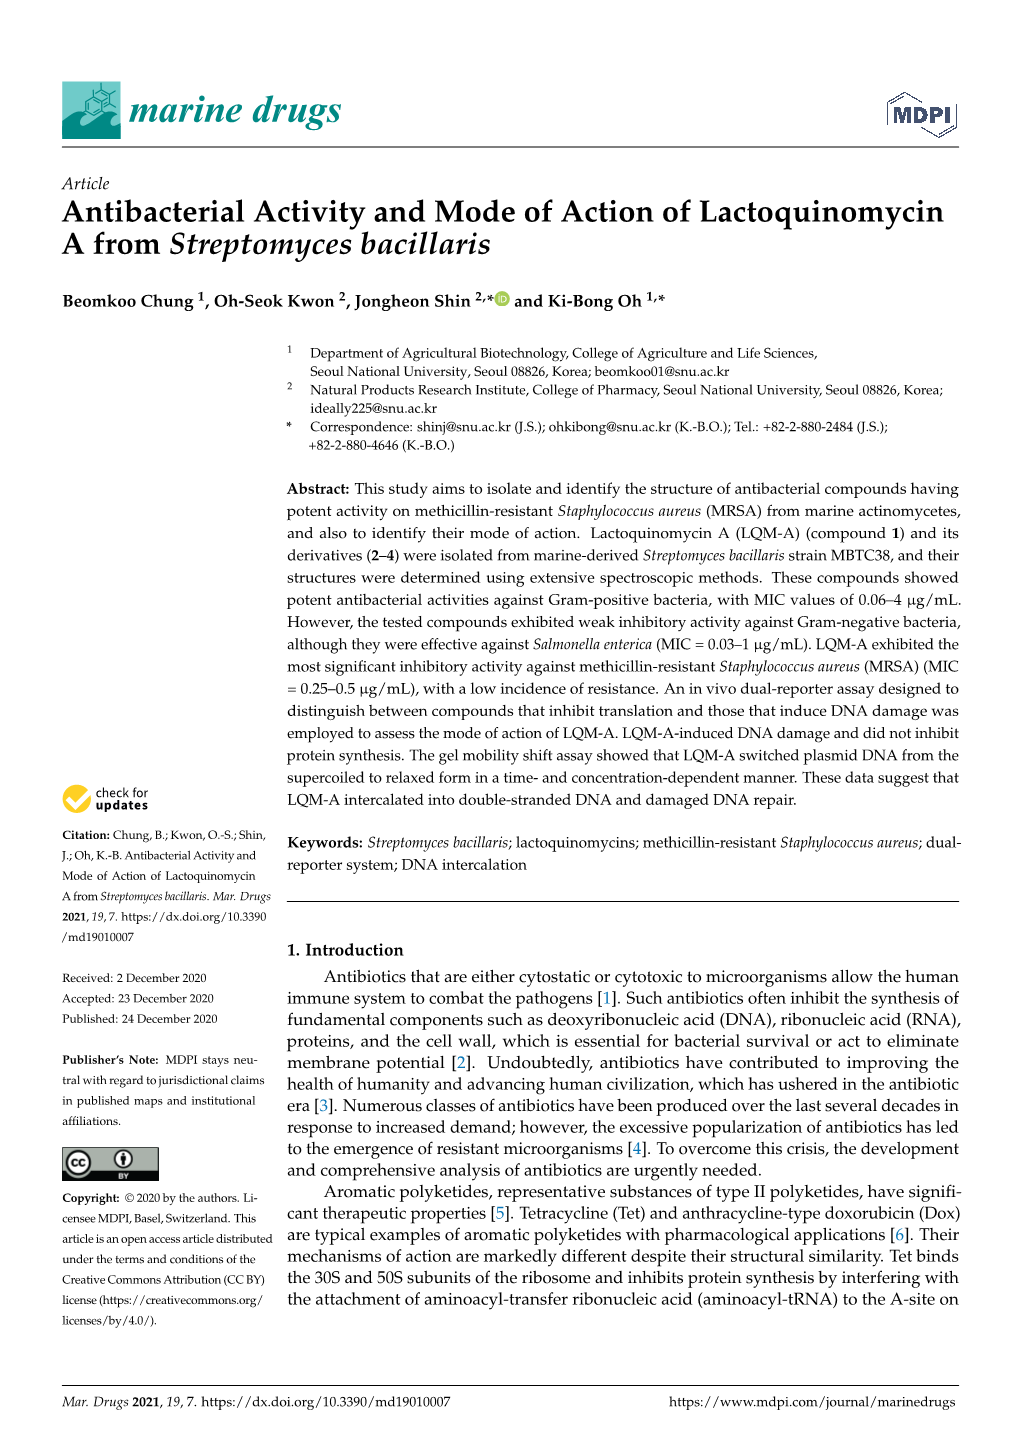 Antibacterial Activity and Mode of Action of Lactoquinomycin a from Streptomyces Bacillaris